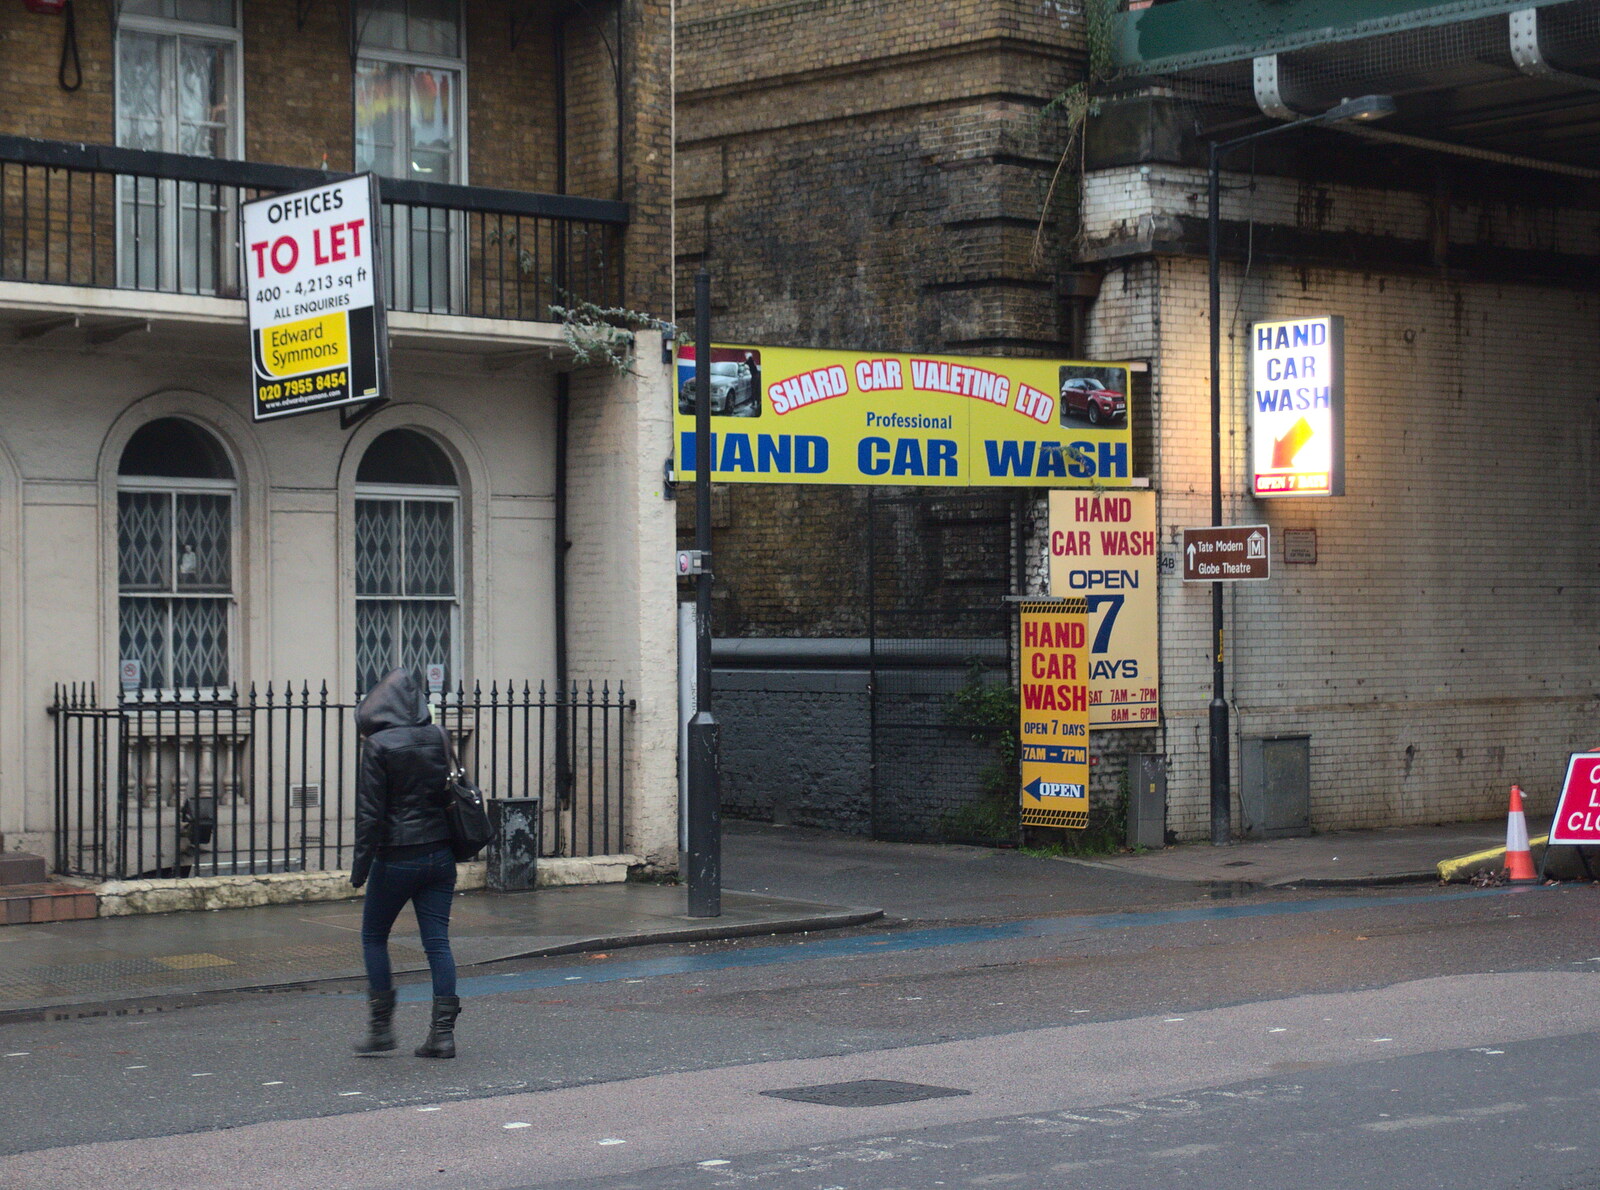 The car wash near the office in Southwark  from The Lorry-Eating Pavement of Diss, Norfolk - 3rd December